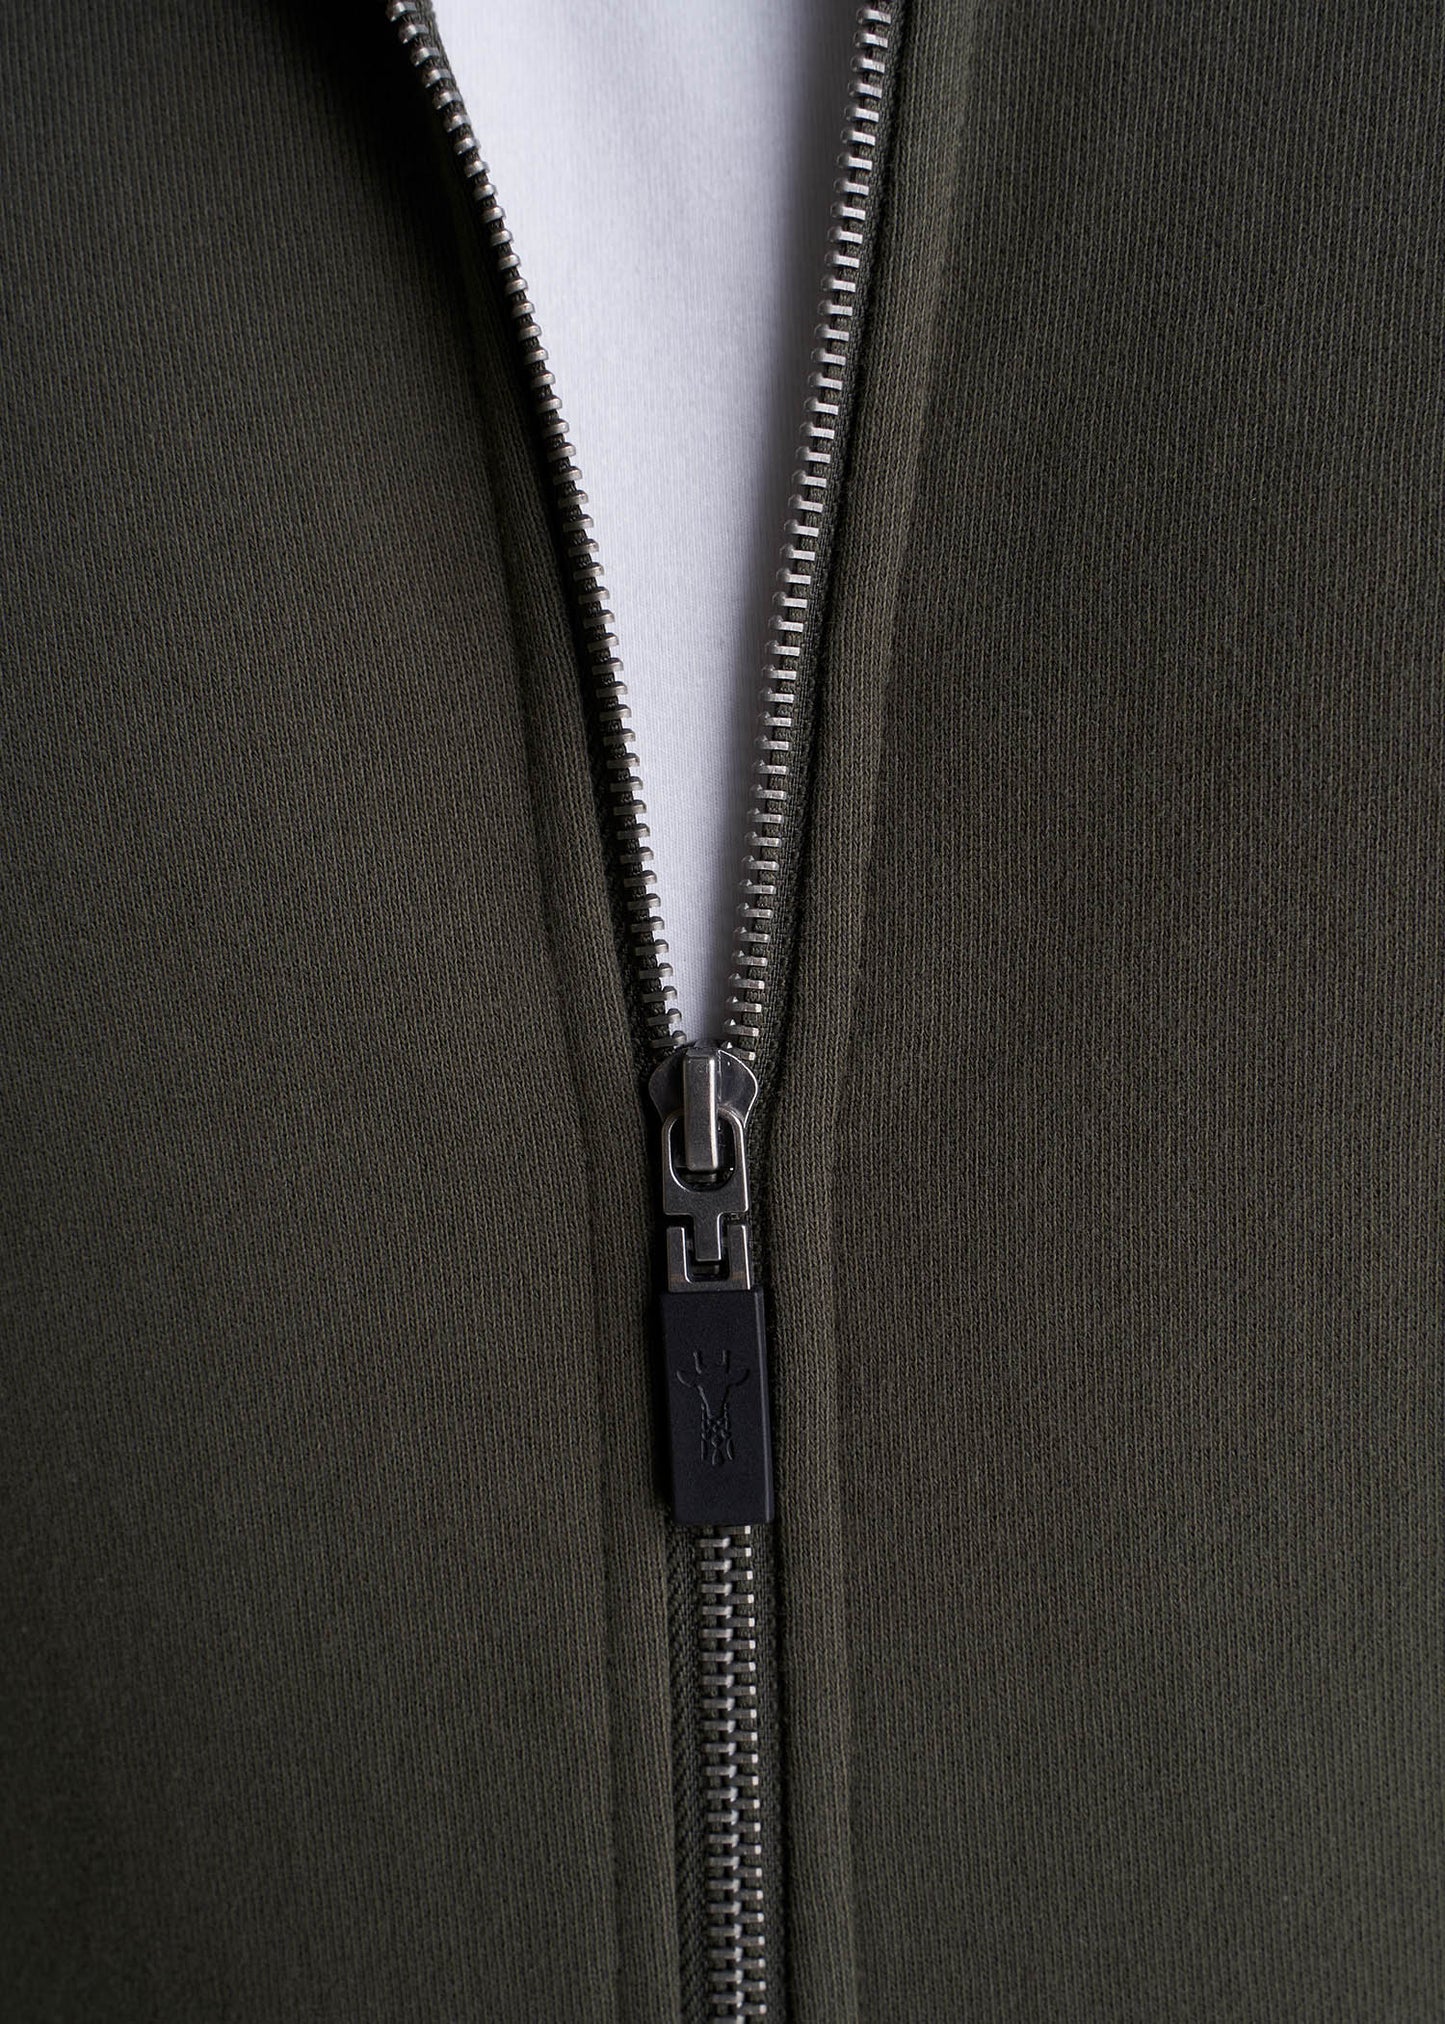 American_Tall_Men_Tall_French_Terry_Zip_Hoodie_CamoGreen-detail